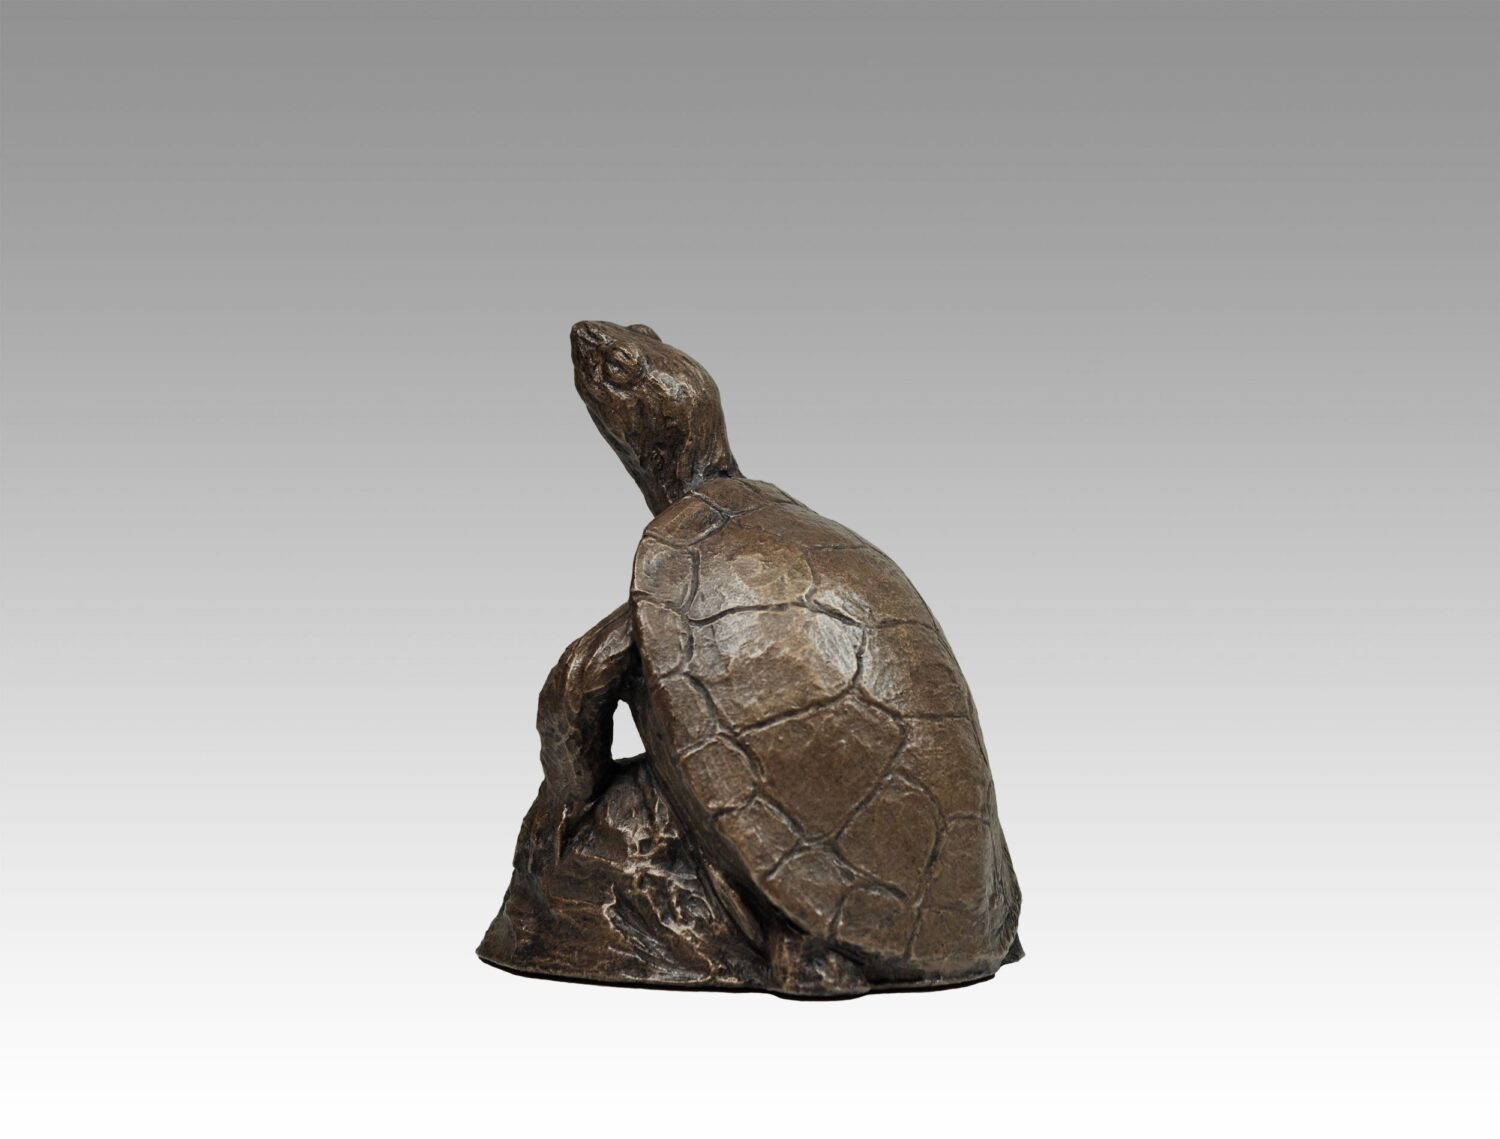 Gallery, The Painted Turtle, $175 CAD, Metal Infused, 6” H, Edition 60, Wildlife Sculpture of a Painted Turtle (back view in photo), Sculptor Tyler Fauvelle